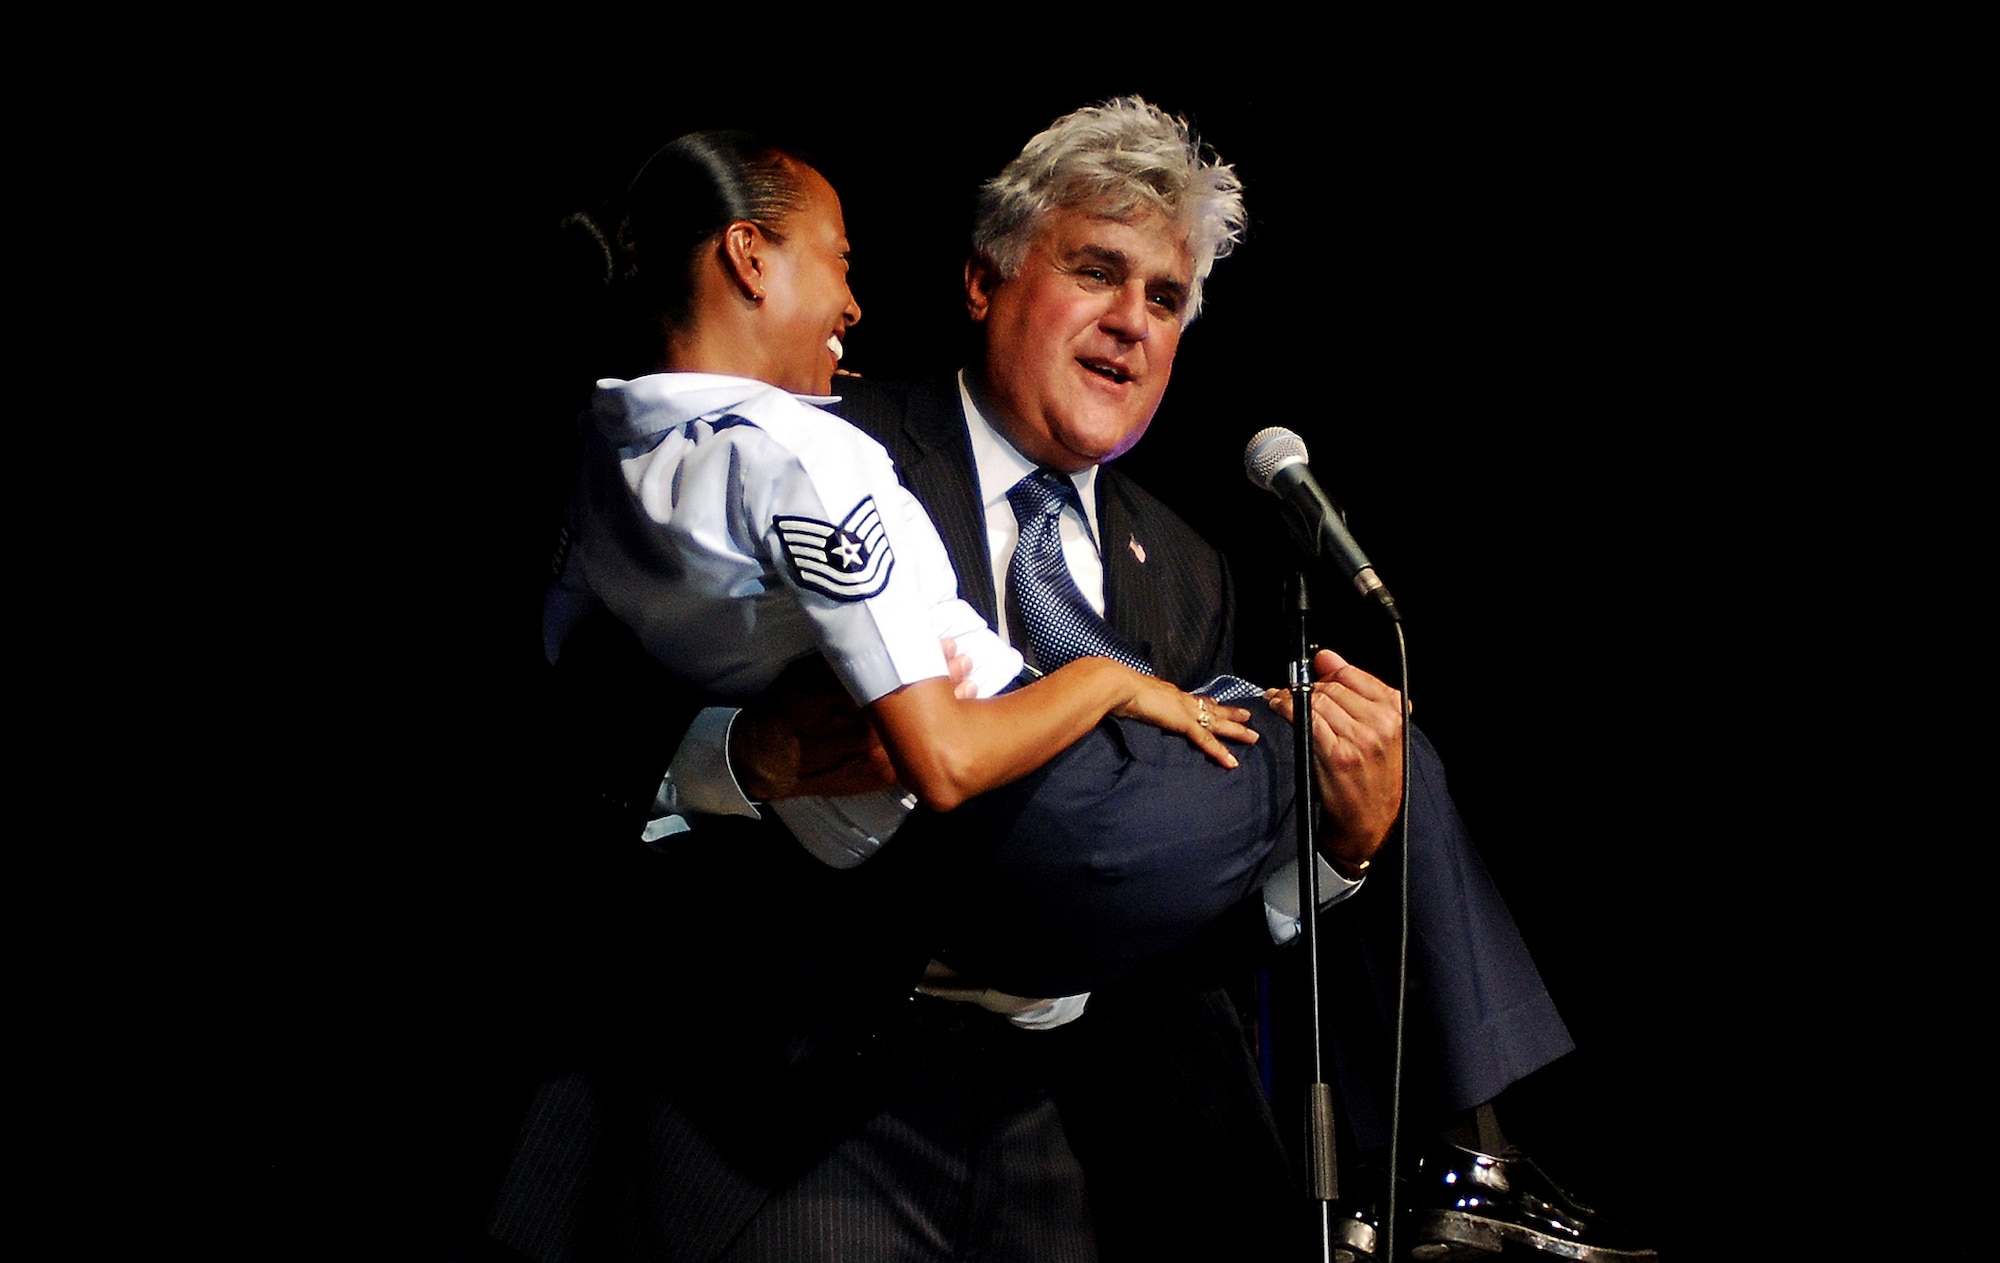 Jay Leno entertains members of the 433rd Airlift Wing, wounded warriors and their families Aug. 6, 2011 at Lackland Air Force Base, Texas. High Flight, an Air Force Reserve band, entertained the audience before Leno took the stage. The performance was part of the Refer a Friend Tour, which was to thank the Airmen who participated and educate other about the benefits of the Get 1 Program.  (U.S. Air Force photo/Senior Airman Brian McGloin)